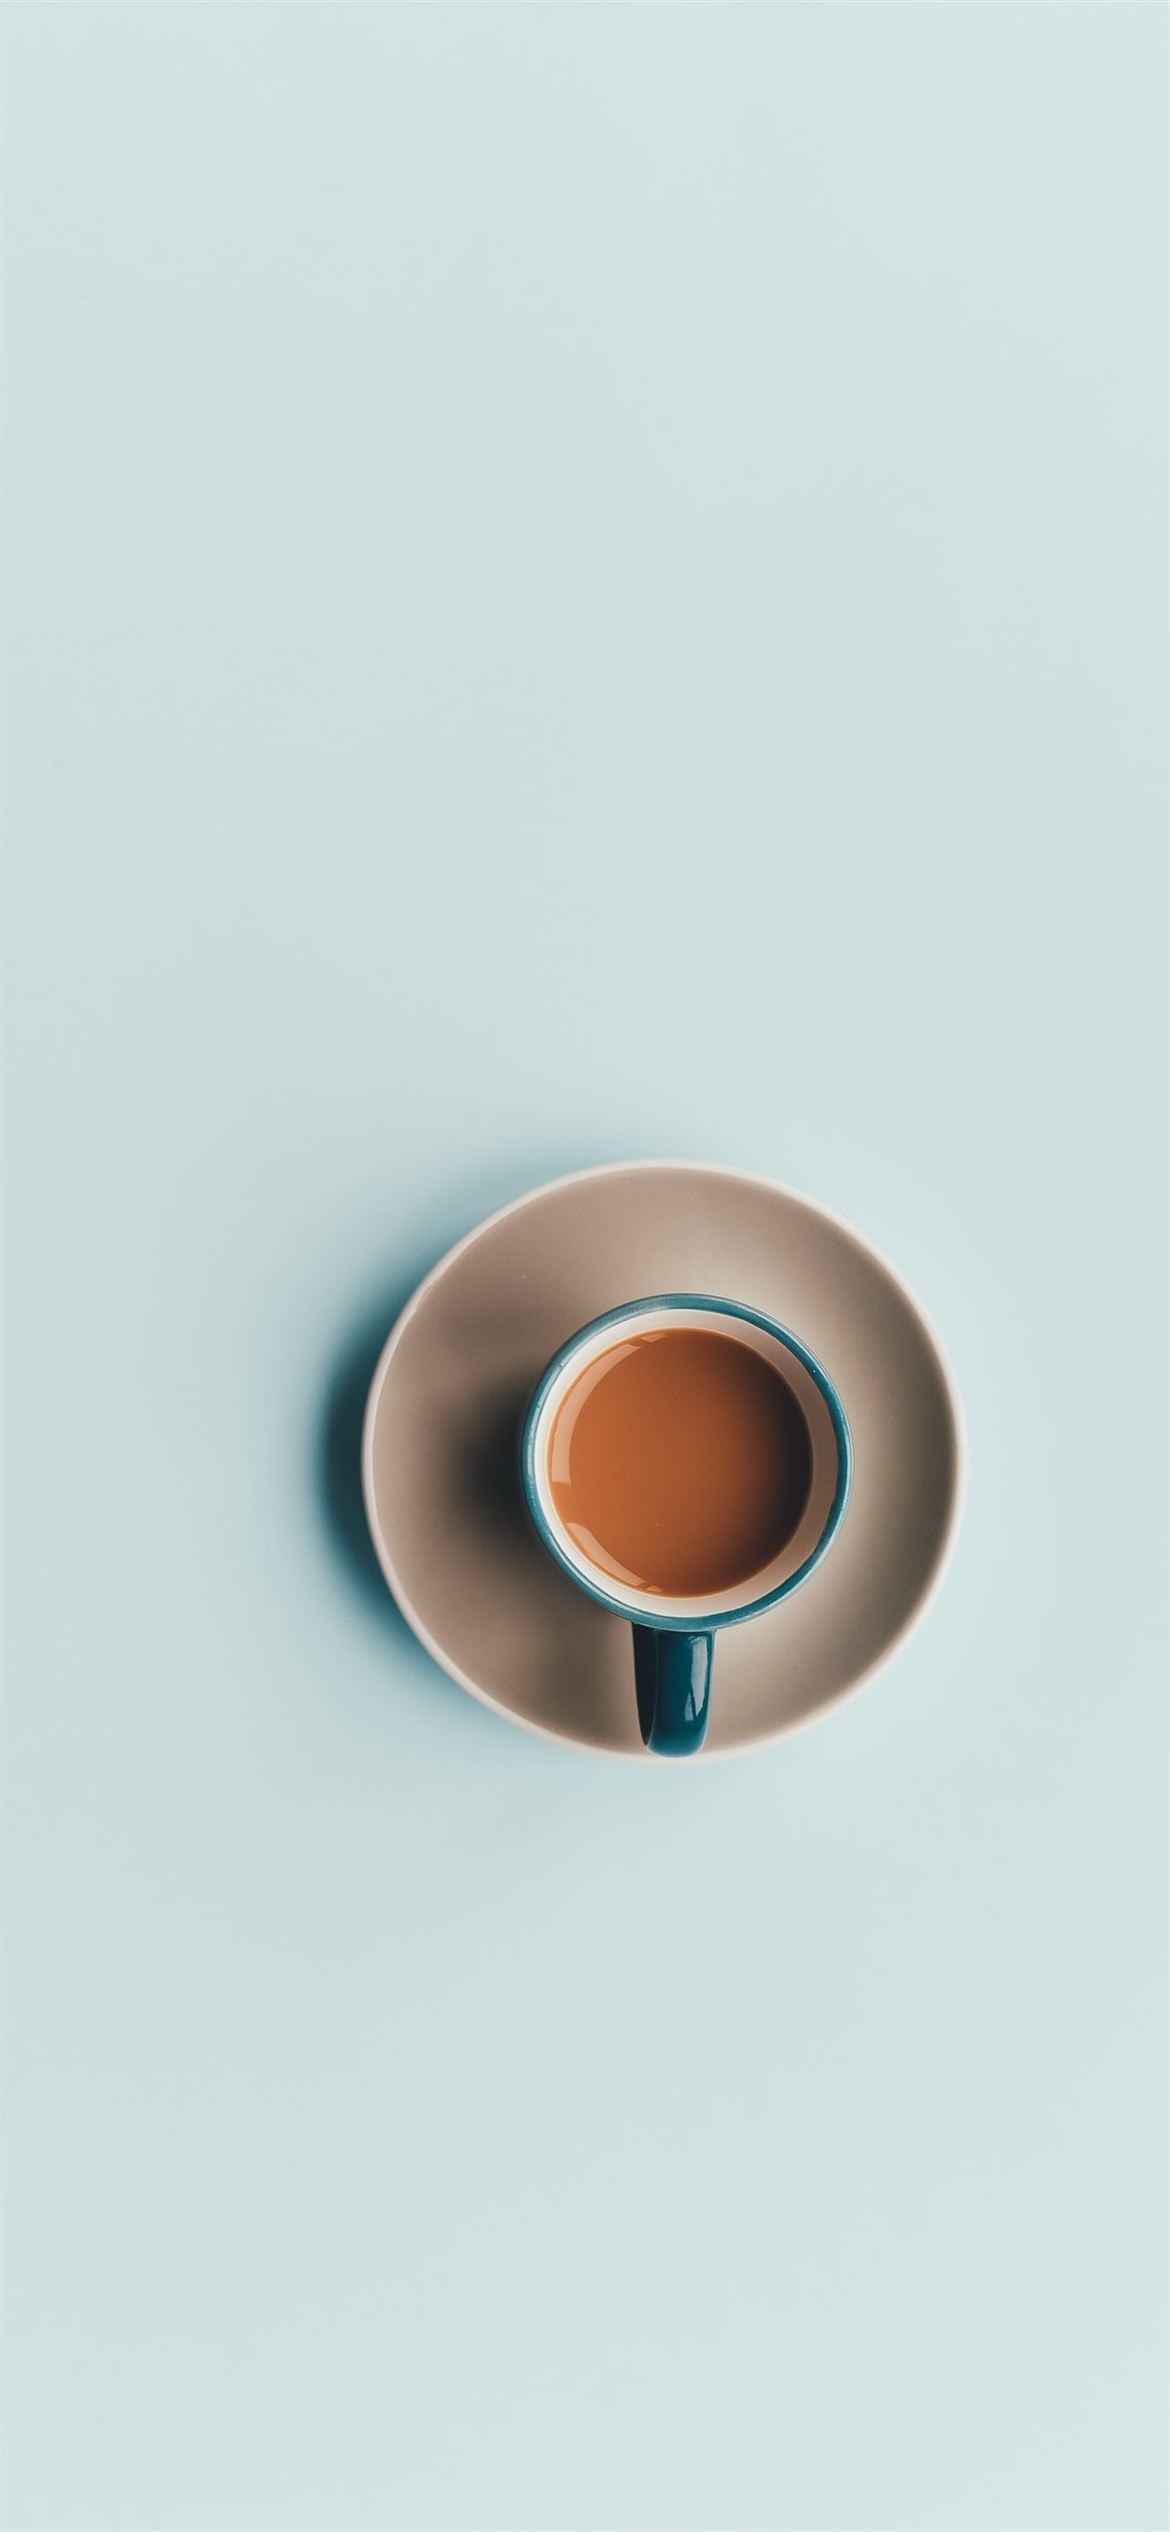 Ceramic coffee cup charm, Elegant saucer pairing, iPhone wallpaper scene, Blue and white delight, 1170x2540 HD Handy